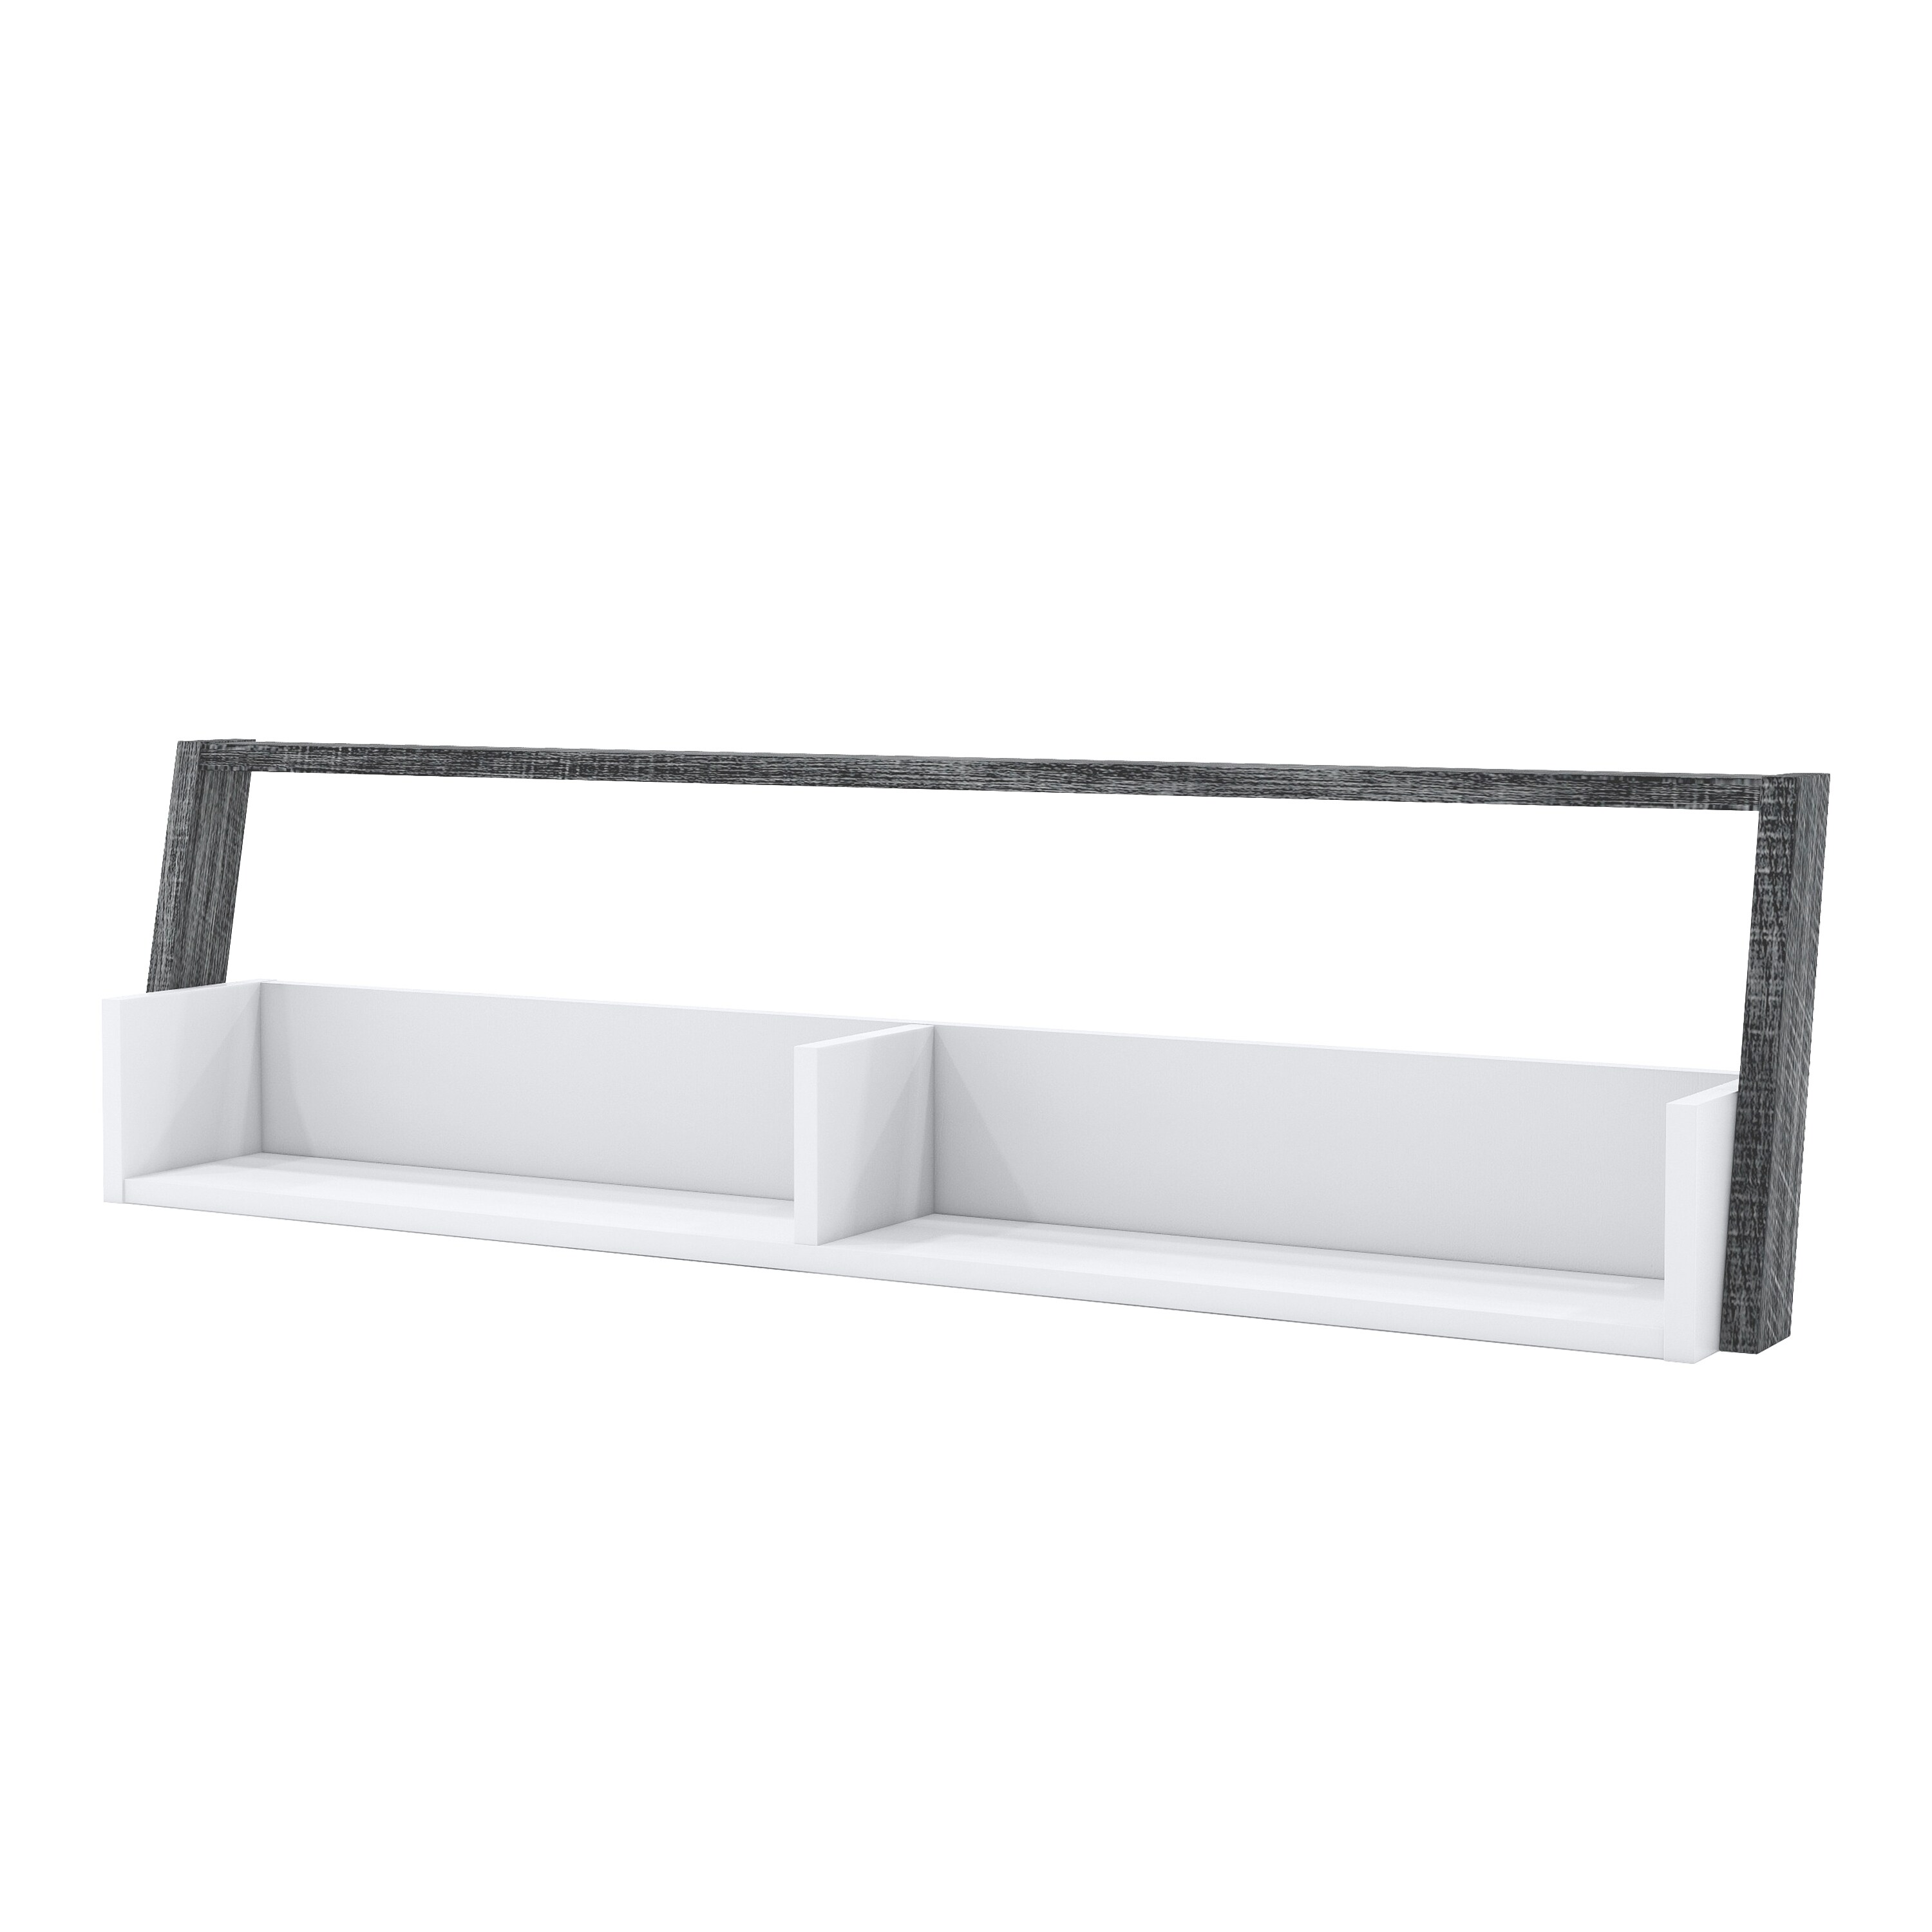 Isabelle Mid-century Modern 2-Shelf Wall-mounted Console by Furniture of America